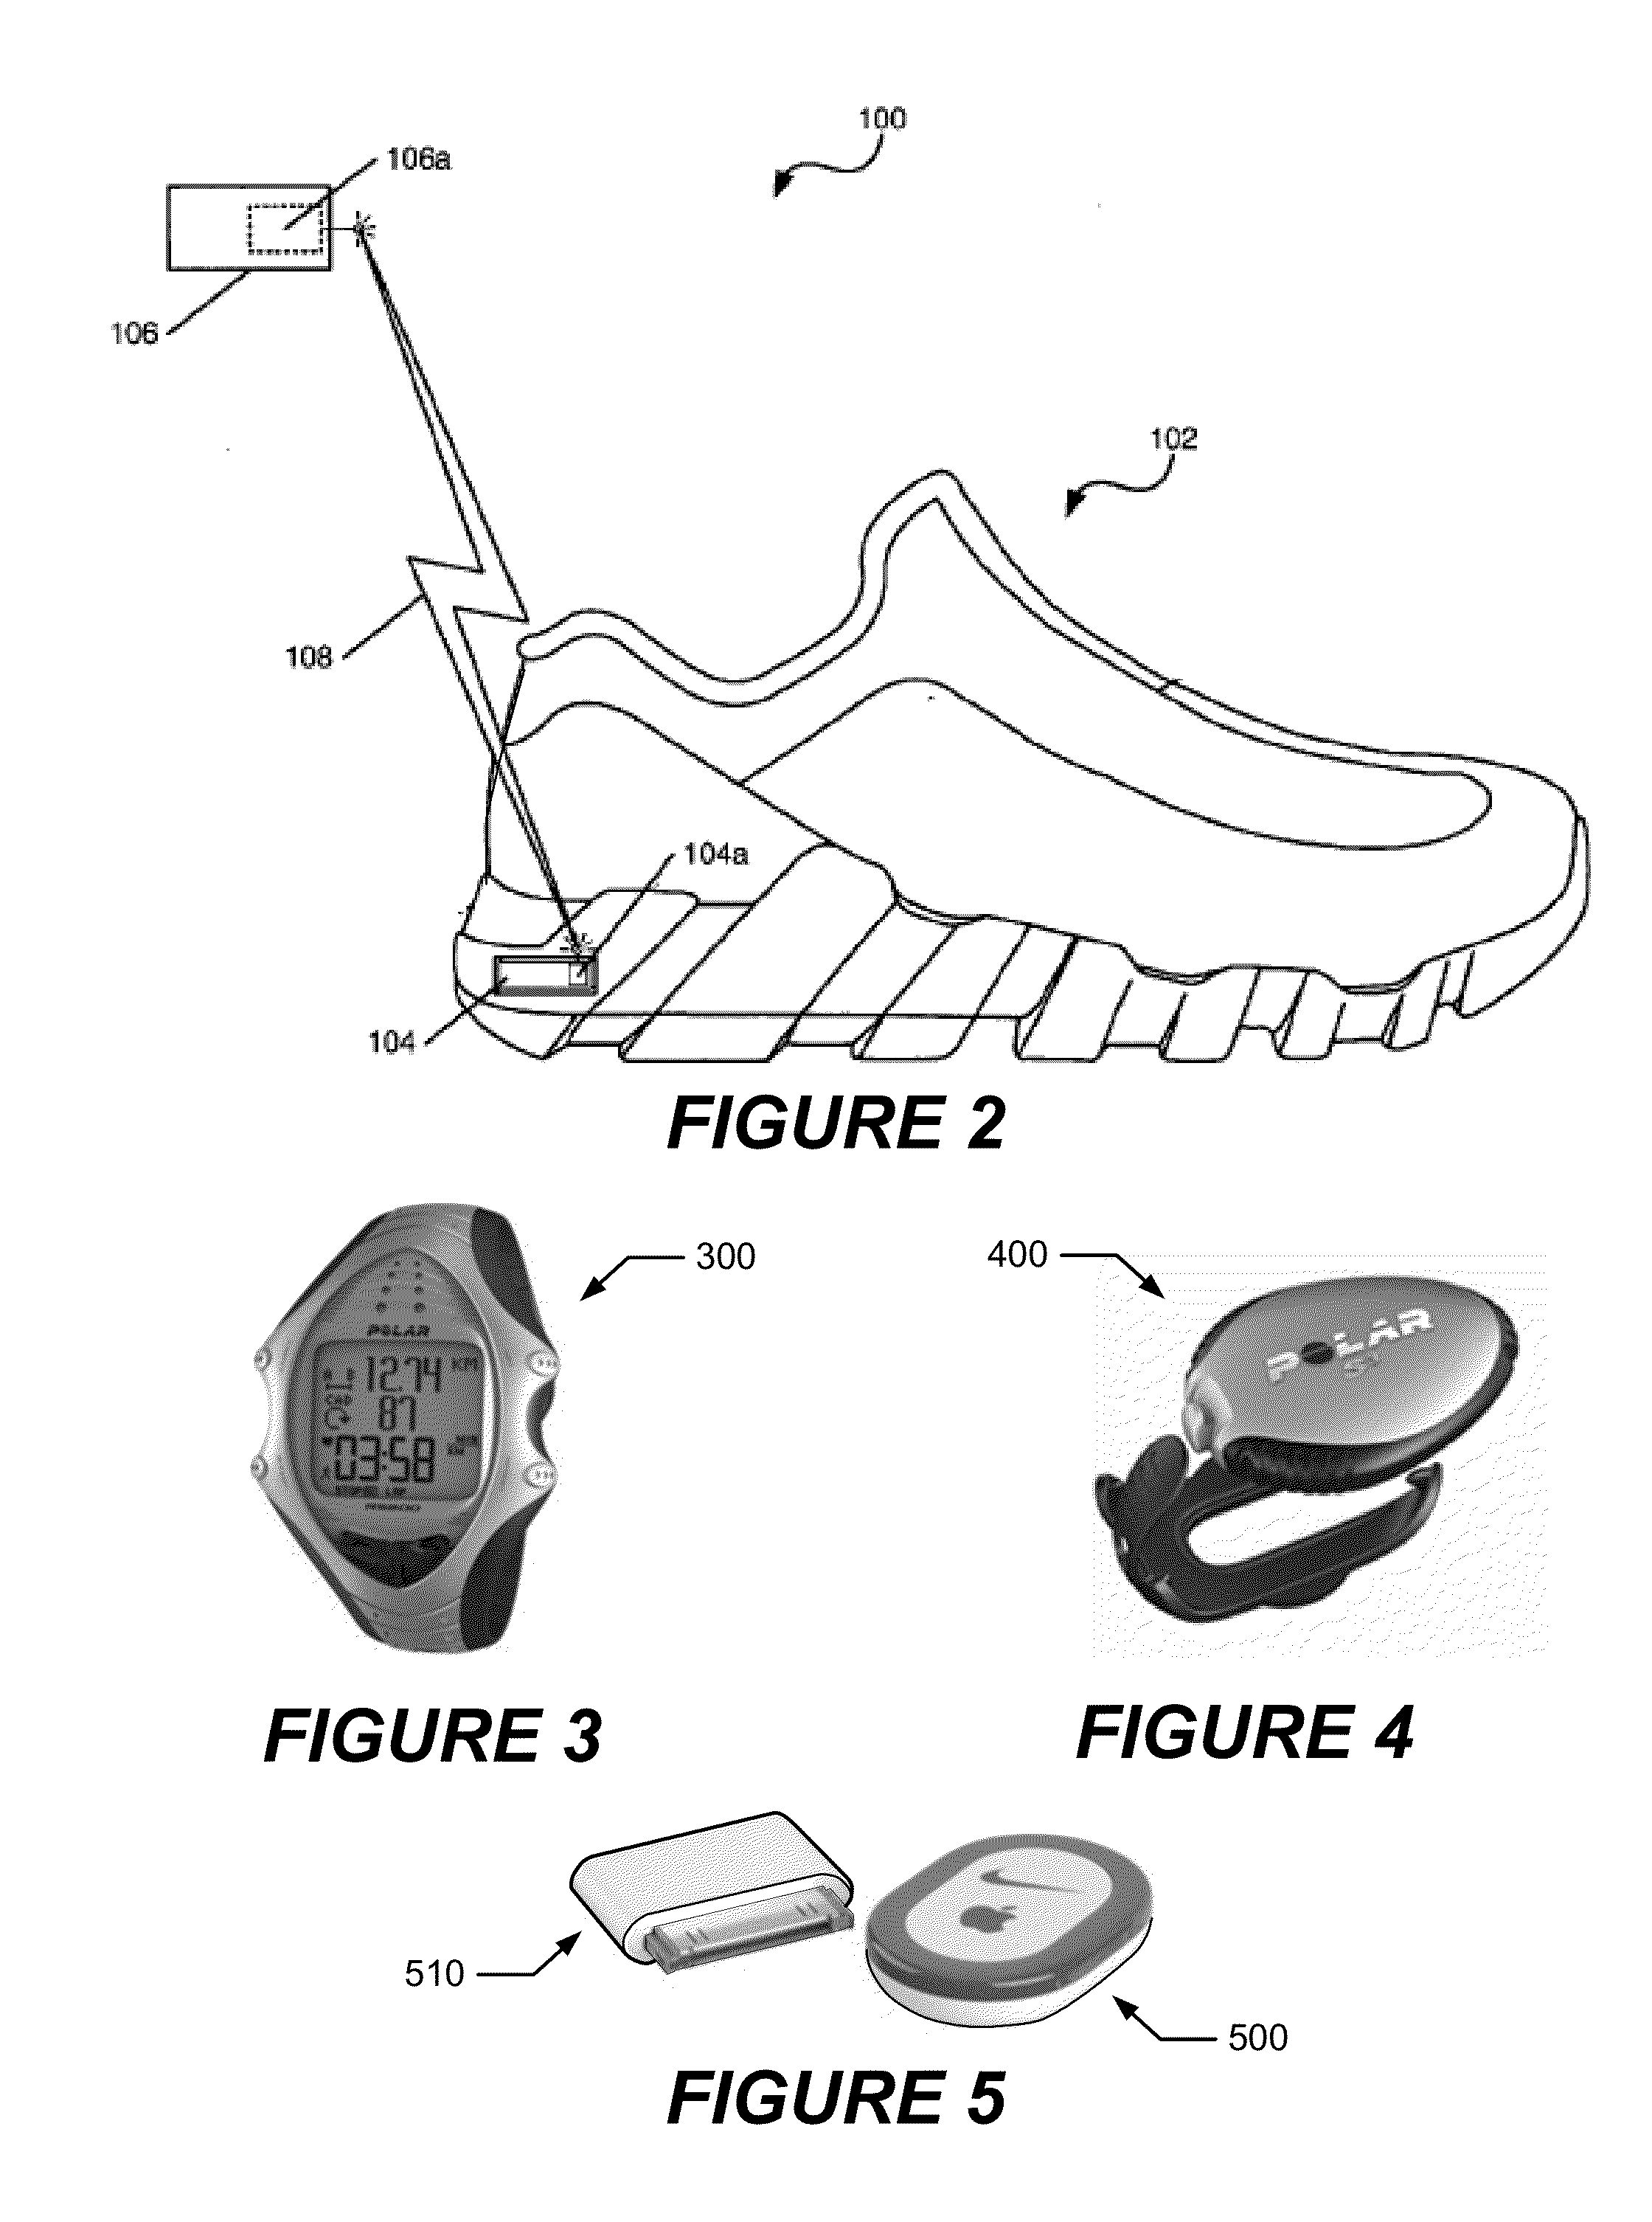 Circuits, systems, and methods for monitoring and coaching a person's sideways spacing foot placement and roll, shoe life, and other running/walking characteristics